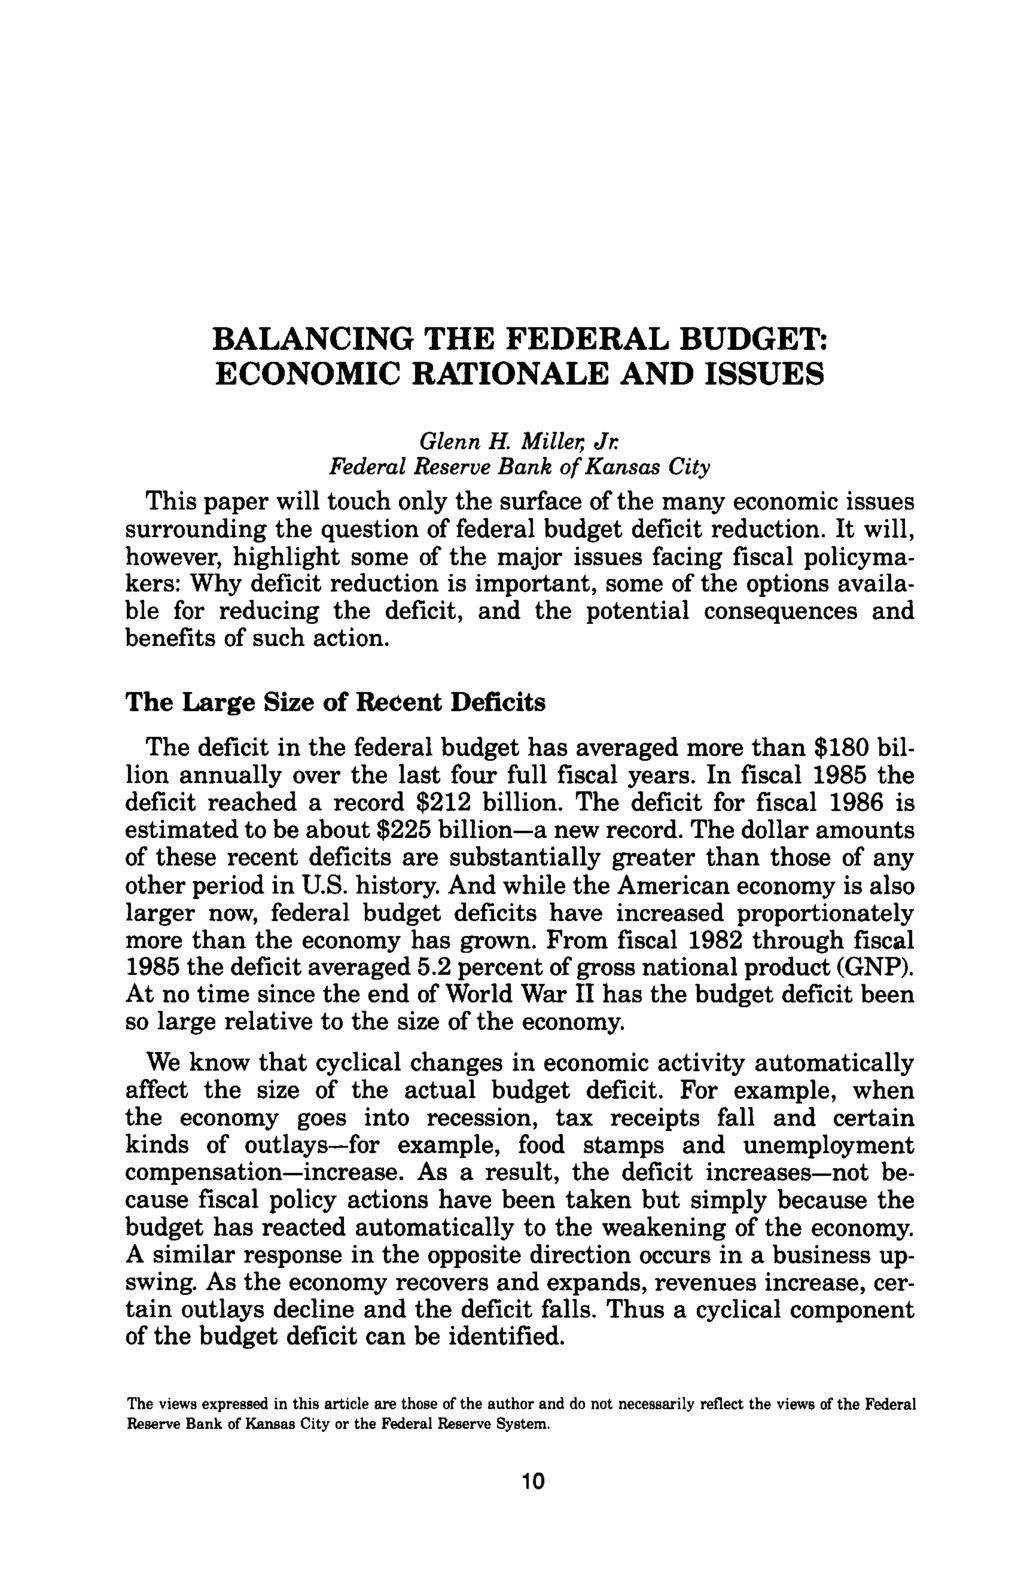 BALANCING THE FEDERAL BUDGET: ECONOMIC RATIONALE AND ISSUES Glenn H. Miller, Jr.